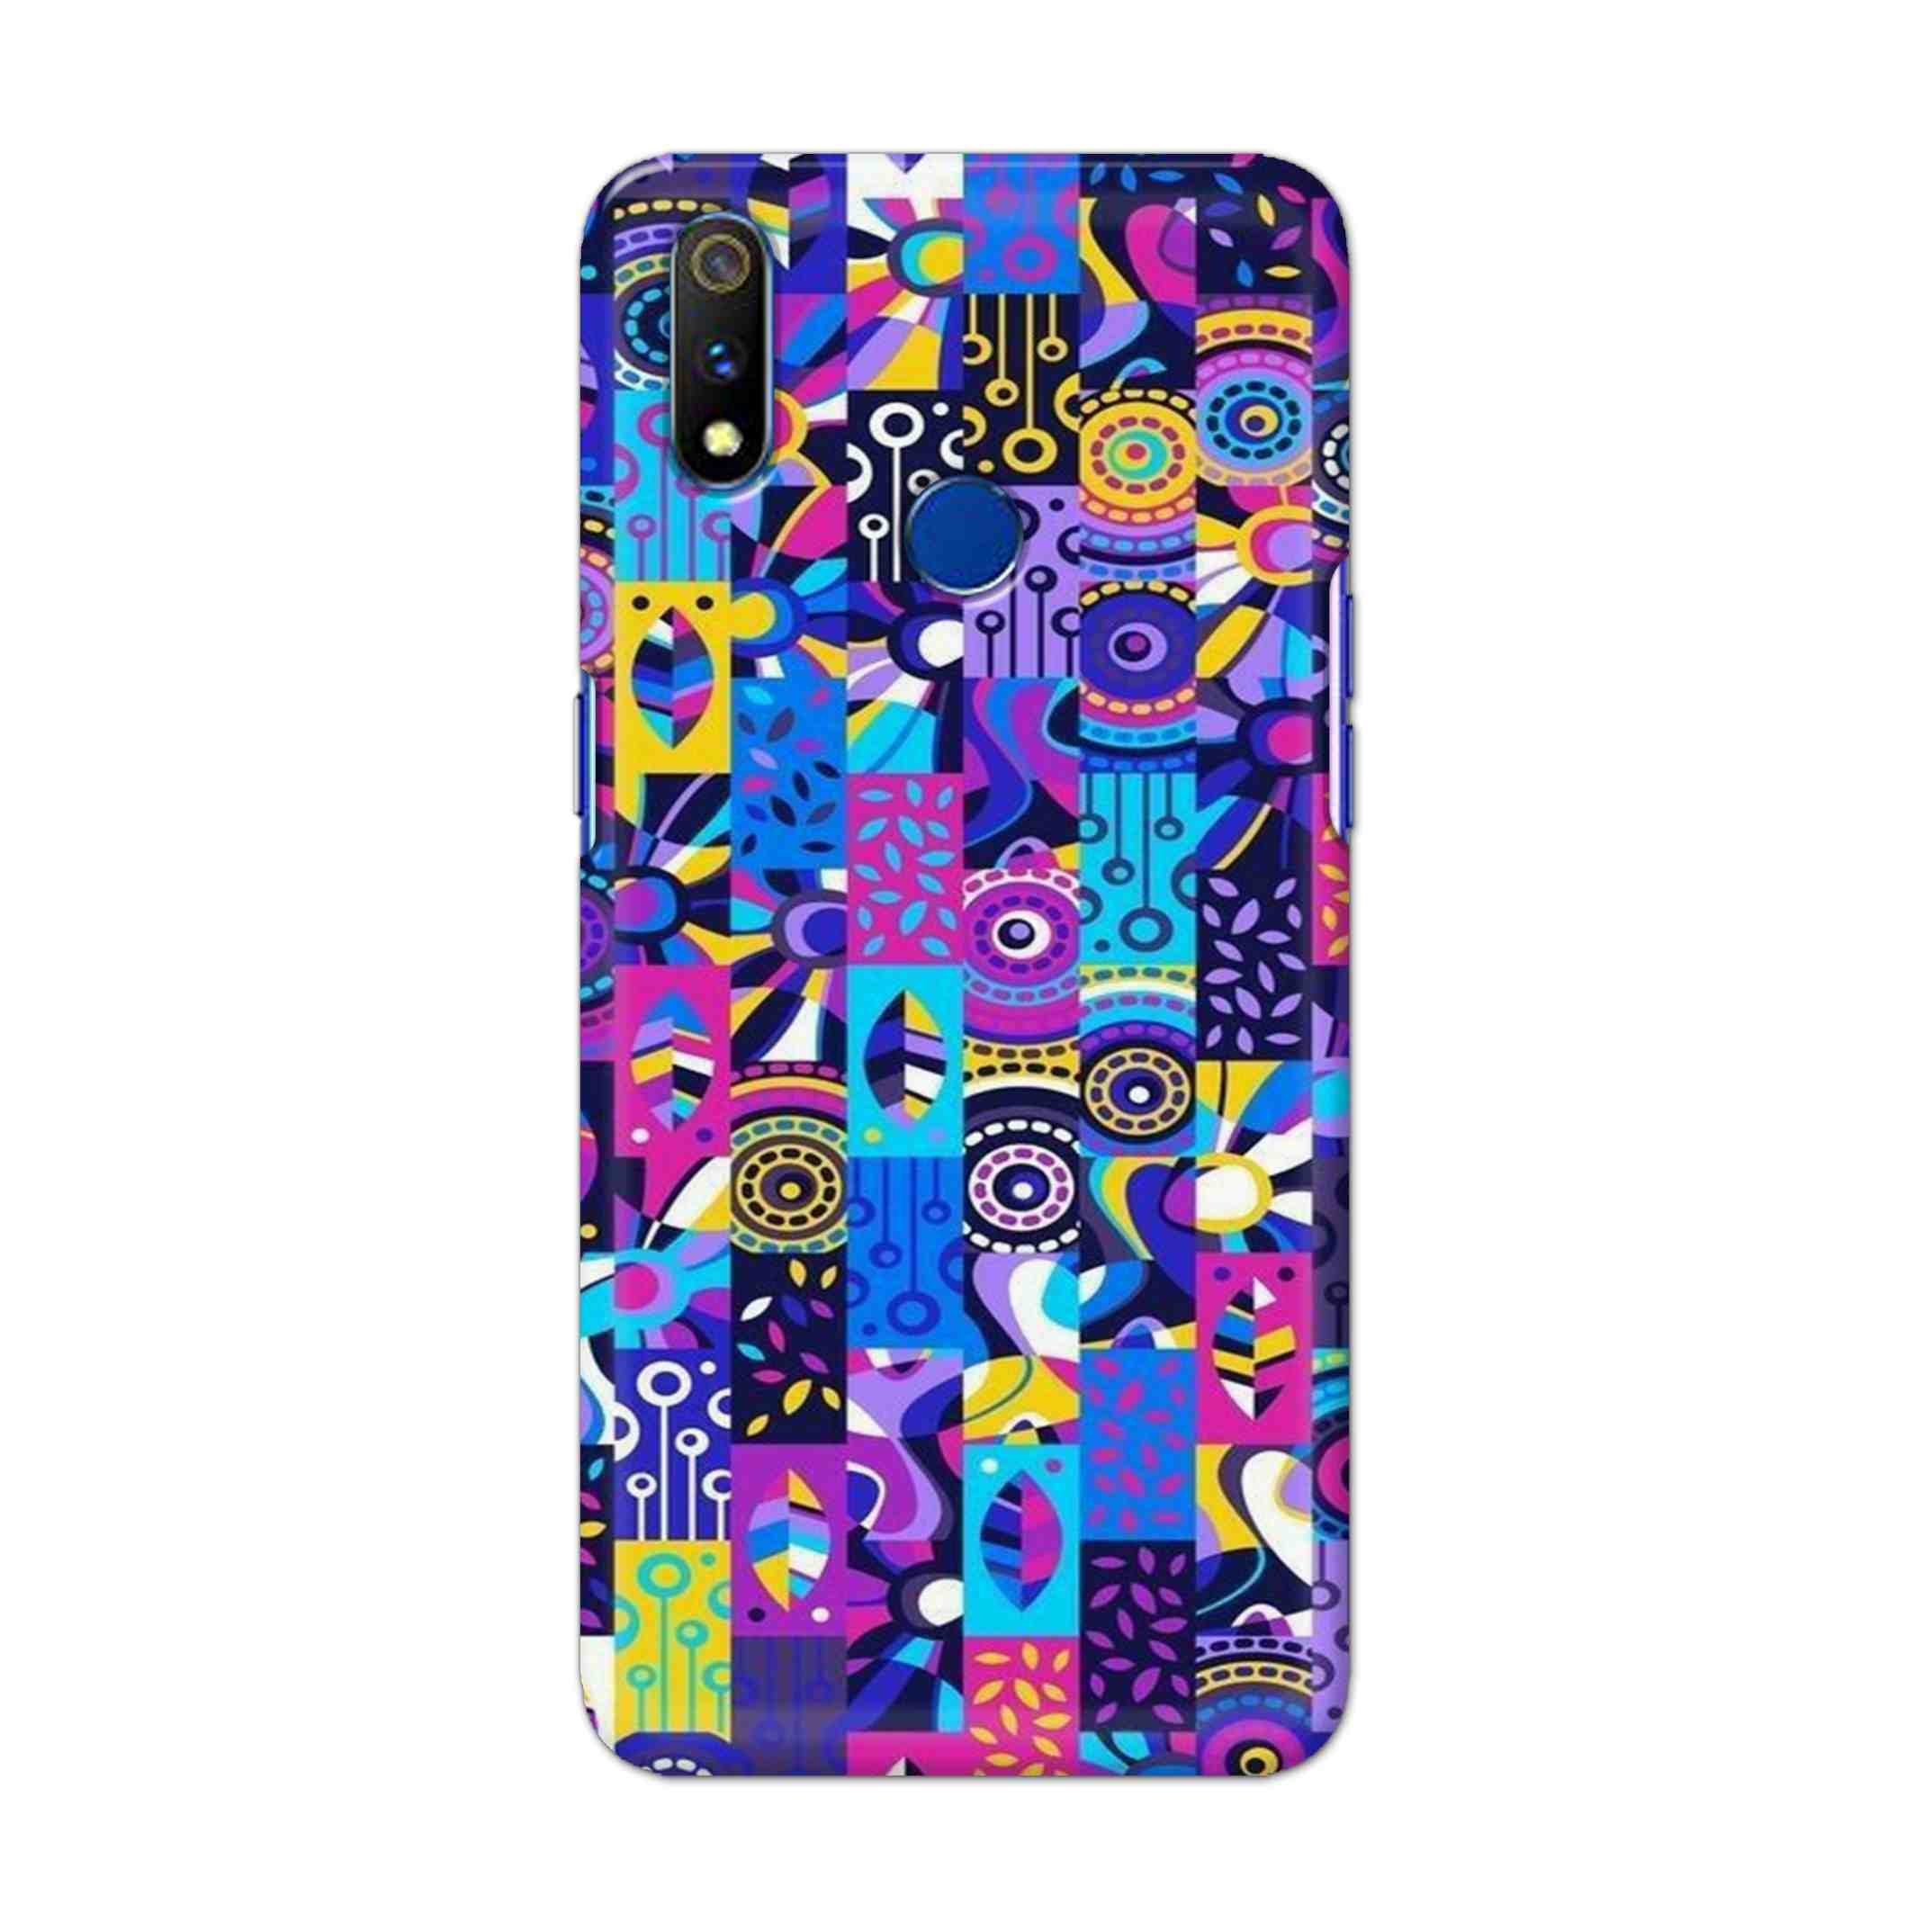 Buy Rainbow Art Hard Back Mobile Phone Case Cover For Realme 3 Pro Online